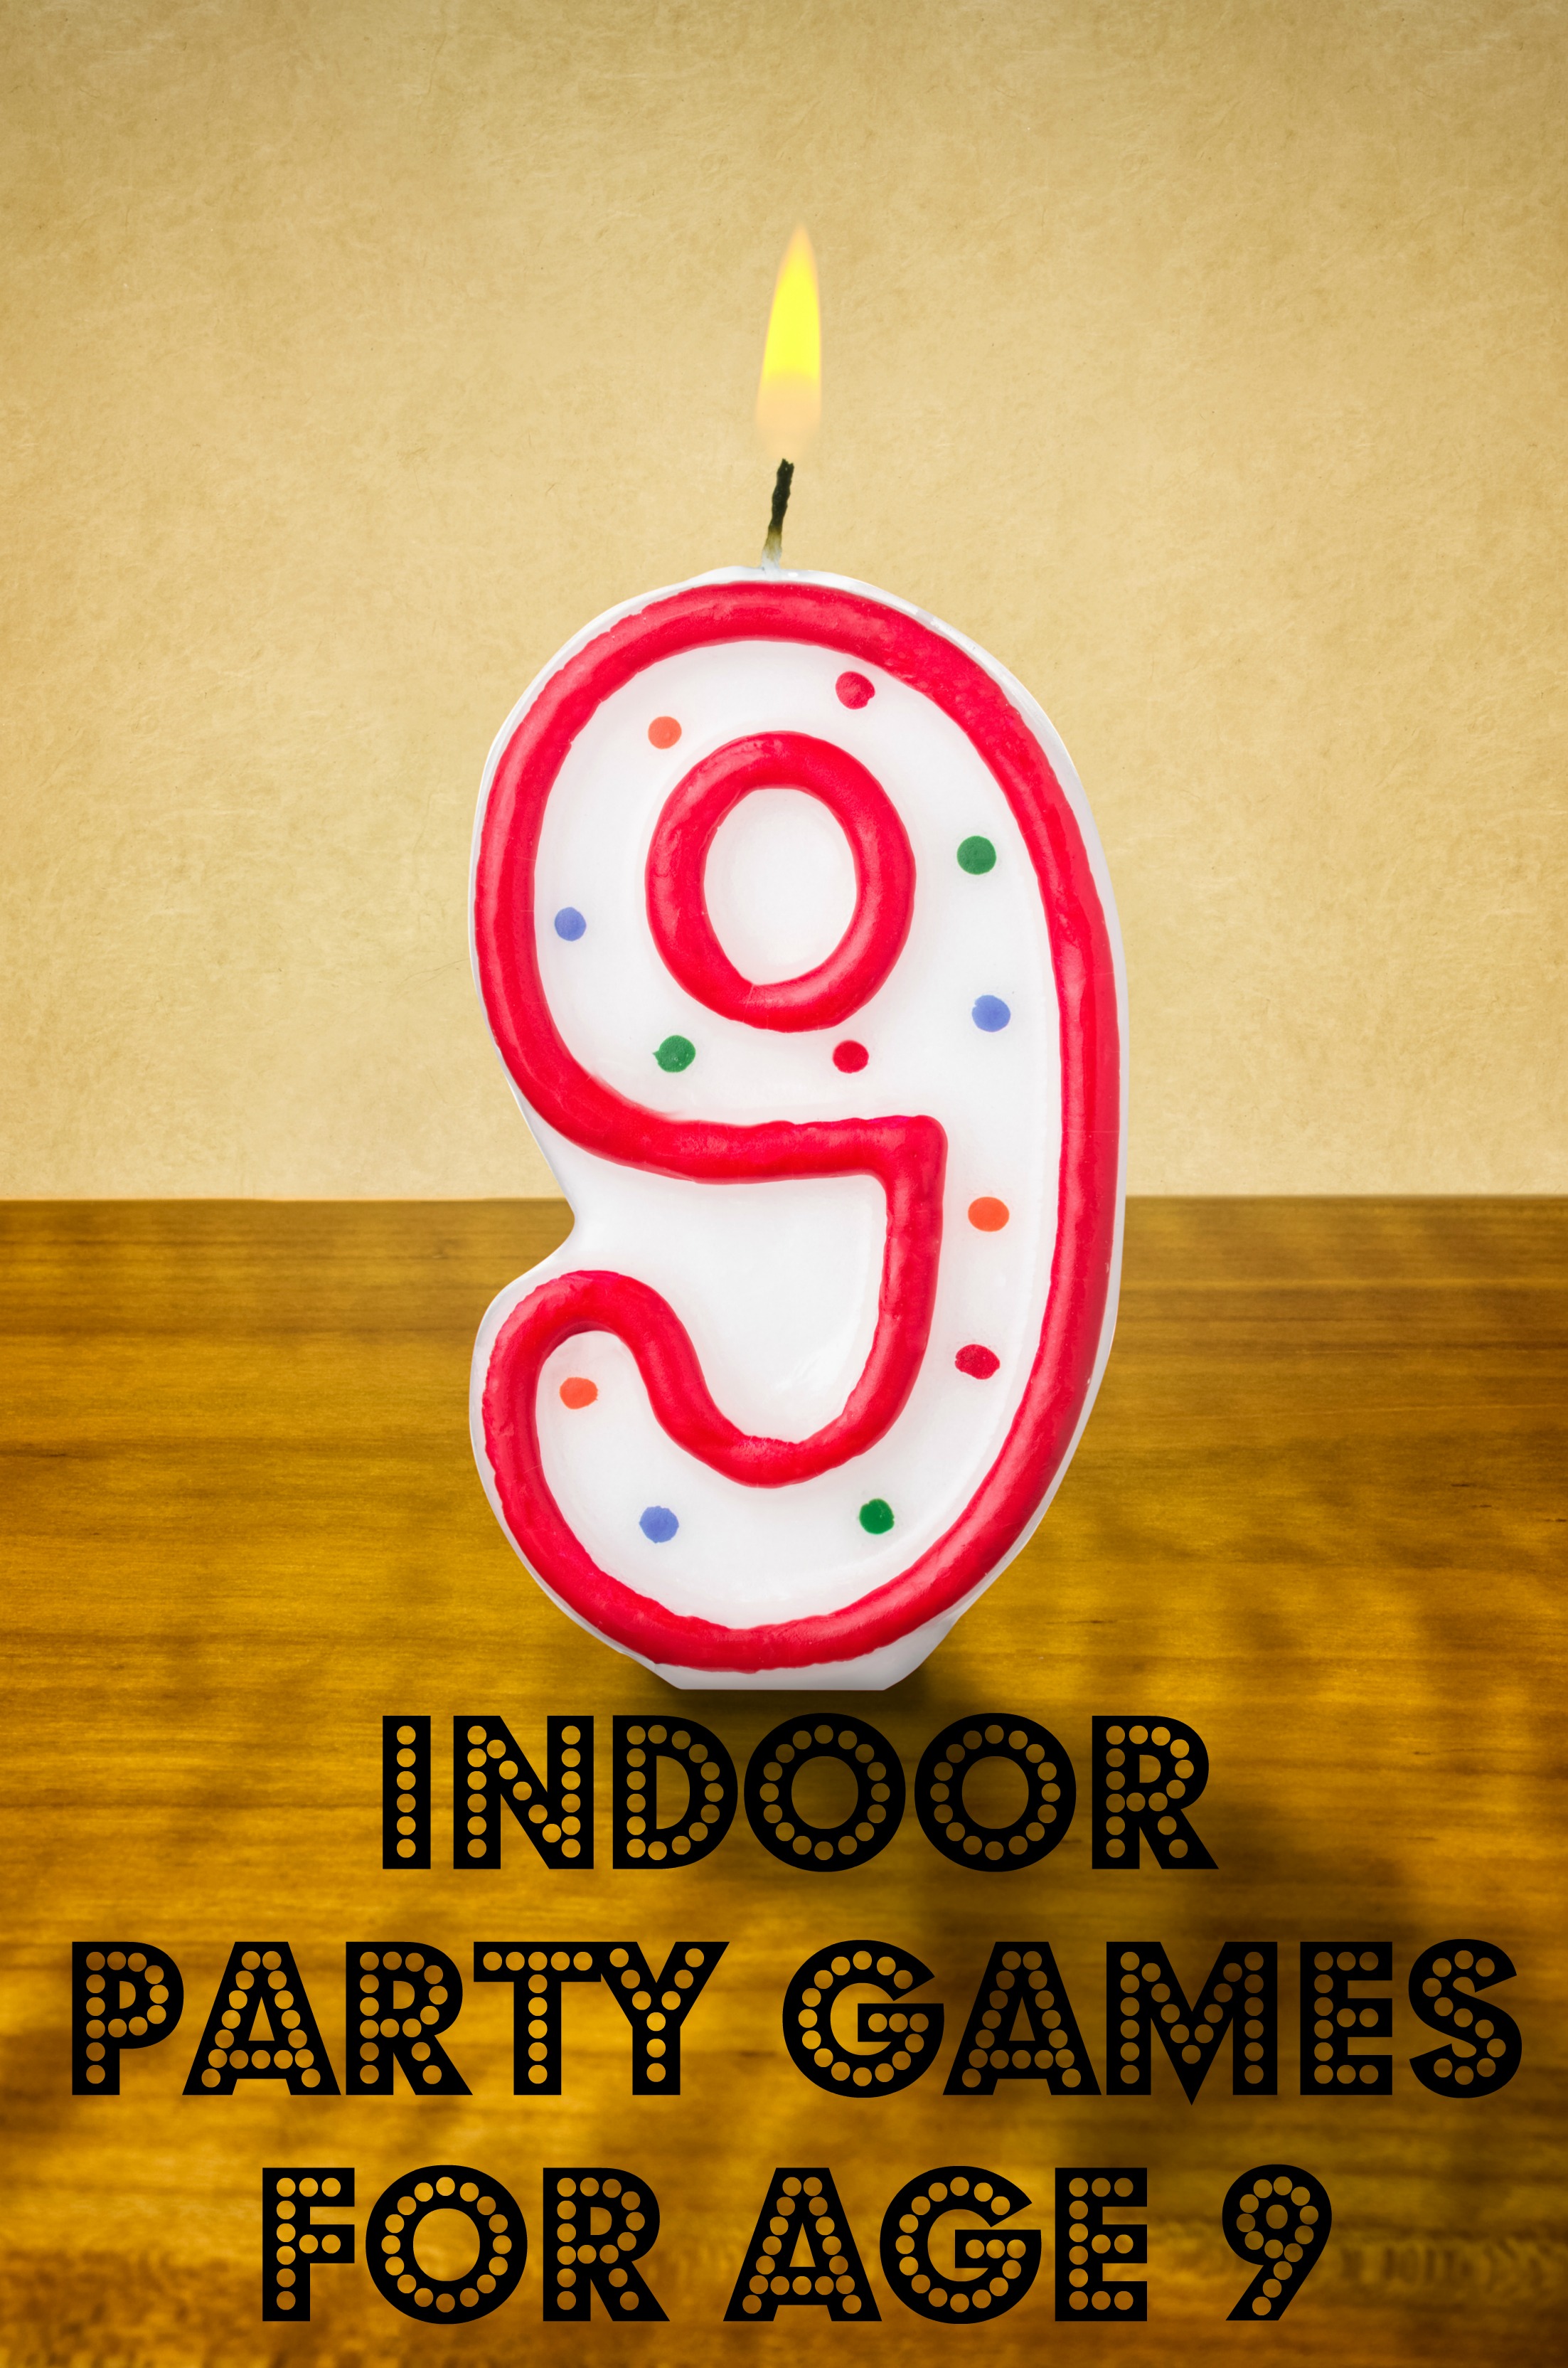 Planning indoor party games for age 9 gets tricky because this age group is past some of the fun games younger kids enjoy. Relax! We have you covered!